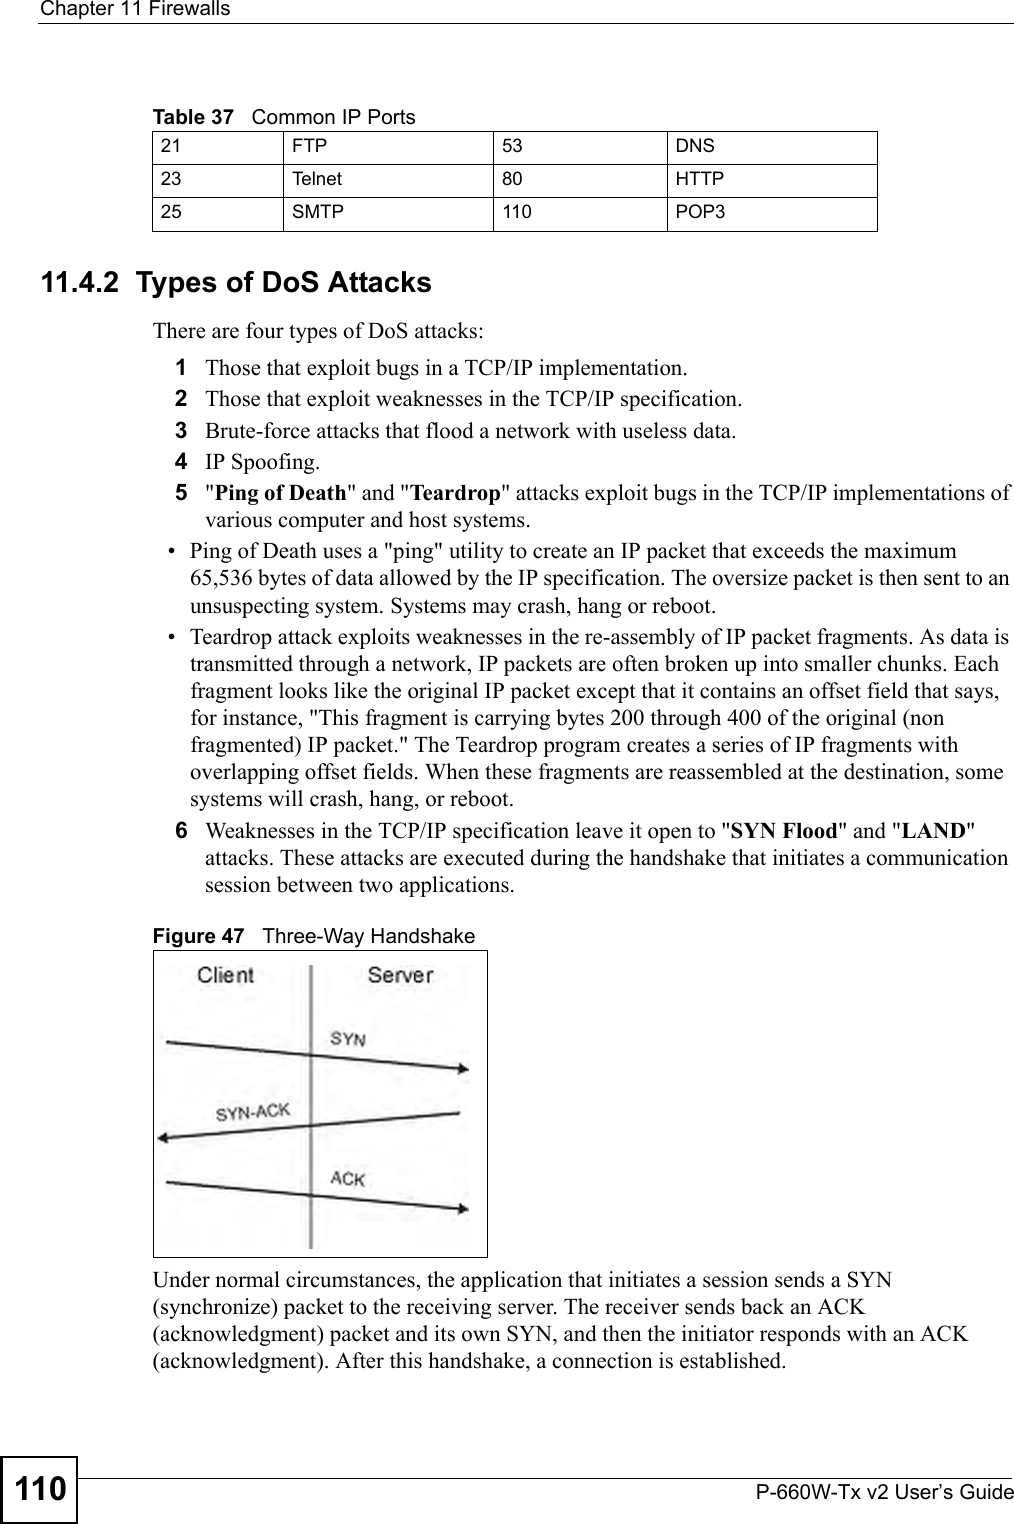 Chapter 11 FirewallsP-660W-Tx v2 User’s Guide11011.4.2  Types of DoS AttacksThere are four types of DoS attacks: 1Those that exploit bugs in a TCP/IP implementation.2Those that exploit weaknesses in the TCP/IP specification.3Brute-force attacks that flood a network with useless data. 4IP Spoofing.5&quot;Ping of Death&quot; and &quot;Teardrop&quot; attacks exploit bugs in the TCP/IP implementations of various computer and host systems. • Ping of Death uses a &quot;ping&quot; utility to create an IP packet that exceeds the maximum 65,536 bytes of data allowed by the IP specification. The oversize packet is then sent to an unsuspecting system. Systems may crash, hang or reboot. • Teardrop attack exploits weaknesses in the re-assembly of IP packet fragments. As data is transmitted through a network, IP packets are often broken up into smaller chunks. Each fragment looks like the original IP packet except that it contains an offset field that says, for instance, &quot;This fragment is carrying bytes 200 through 400 of the original (non fragmented) IP packet.&quot; The Teardrop program creates a series of IP fragments with overlapping offset fields. When these fragments are reassembled at the destination, some systems will crash, hang, or reboot. 6Weaknesses in the TCP/IP specification leave it open to &quot;SYN Flood&quot; and &quot;LAND&quot; attacks. These attacks are executed during the handshake that initiates a communication session between two applications.Figure 47   Three-Way HandshakeUnder normal circumstances, the application that initiates a session sends a SYN (synchronize) packet to the receiving server. The receiver sends back an ACK (acknowledgment) packet and its own SYN, and then the initiator responds with an ACK (acknowledgment). After this handshake, a connection is established. Table 37   Common IP Ports21 FTP 53 DNS23 Telnet 80 HTTP25 SMTP 110 POP3